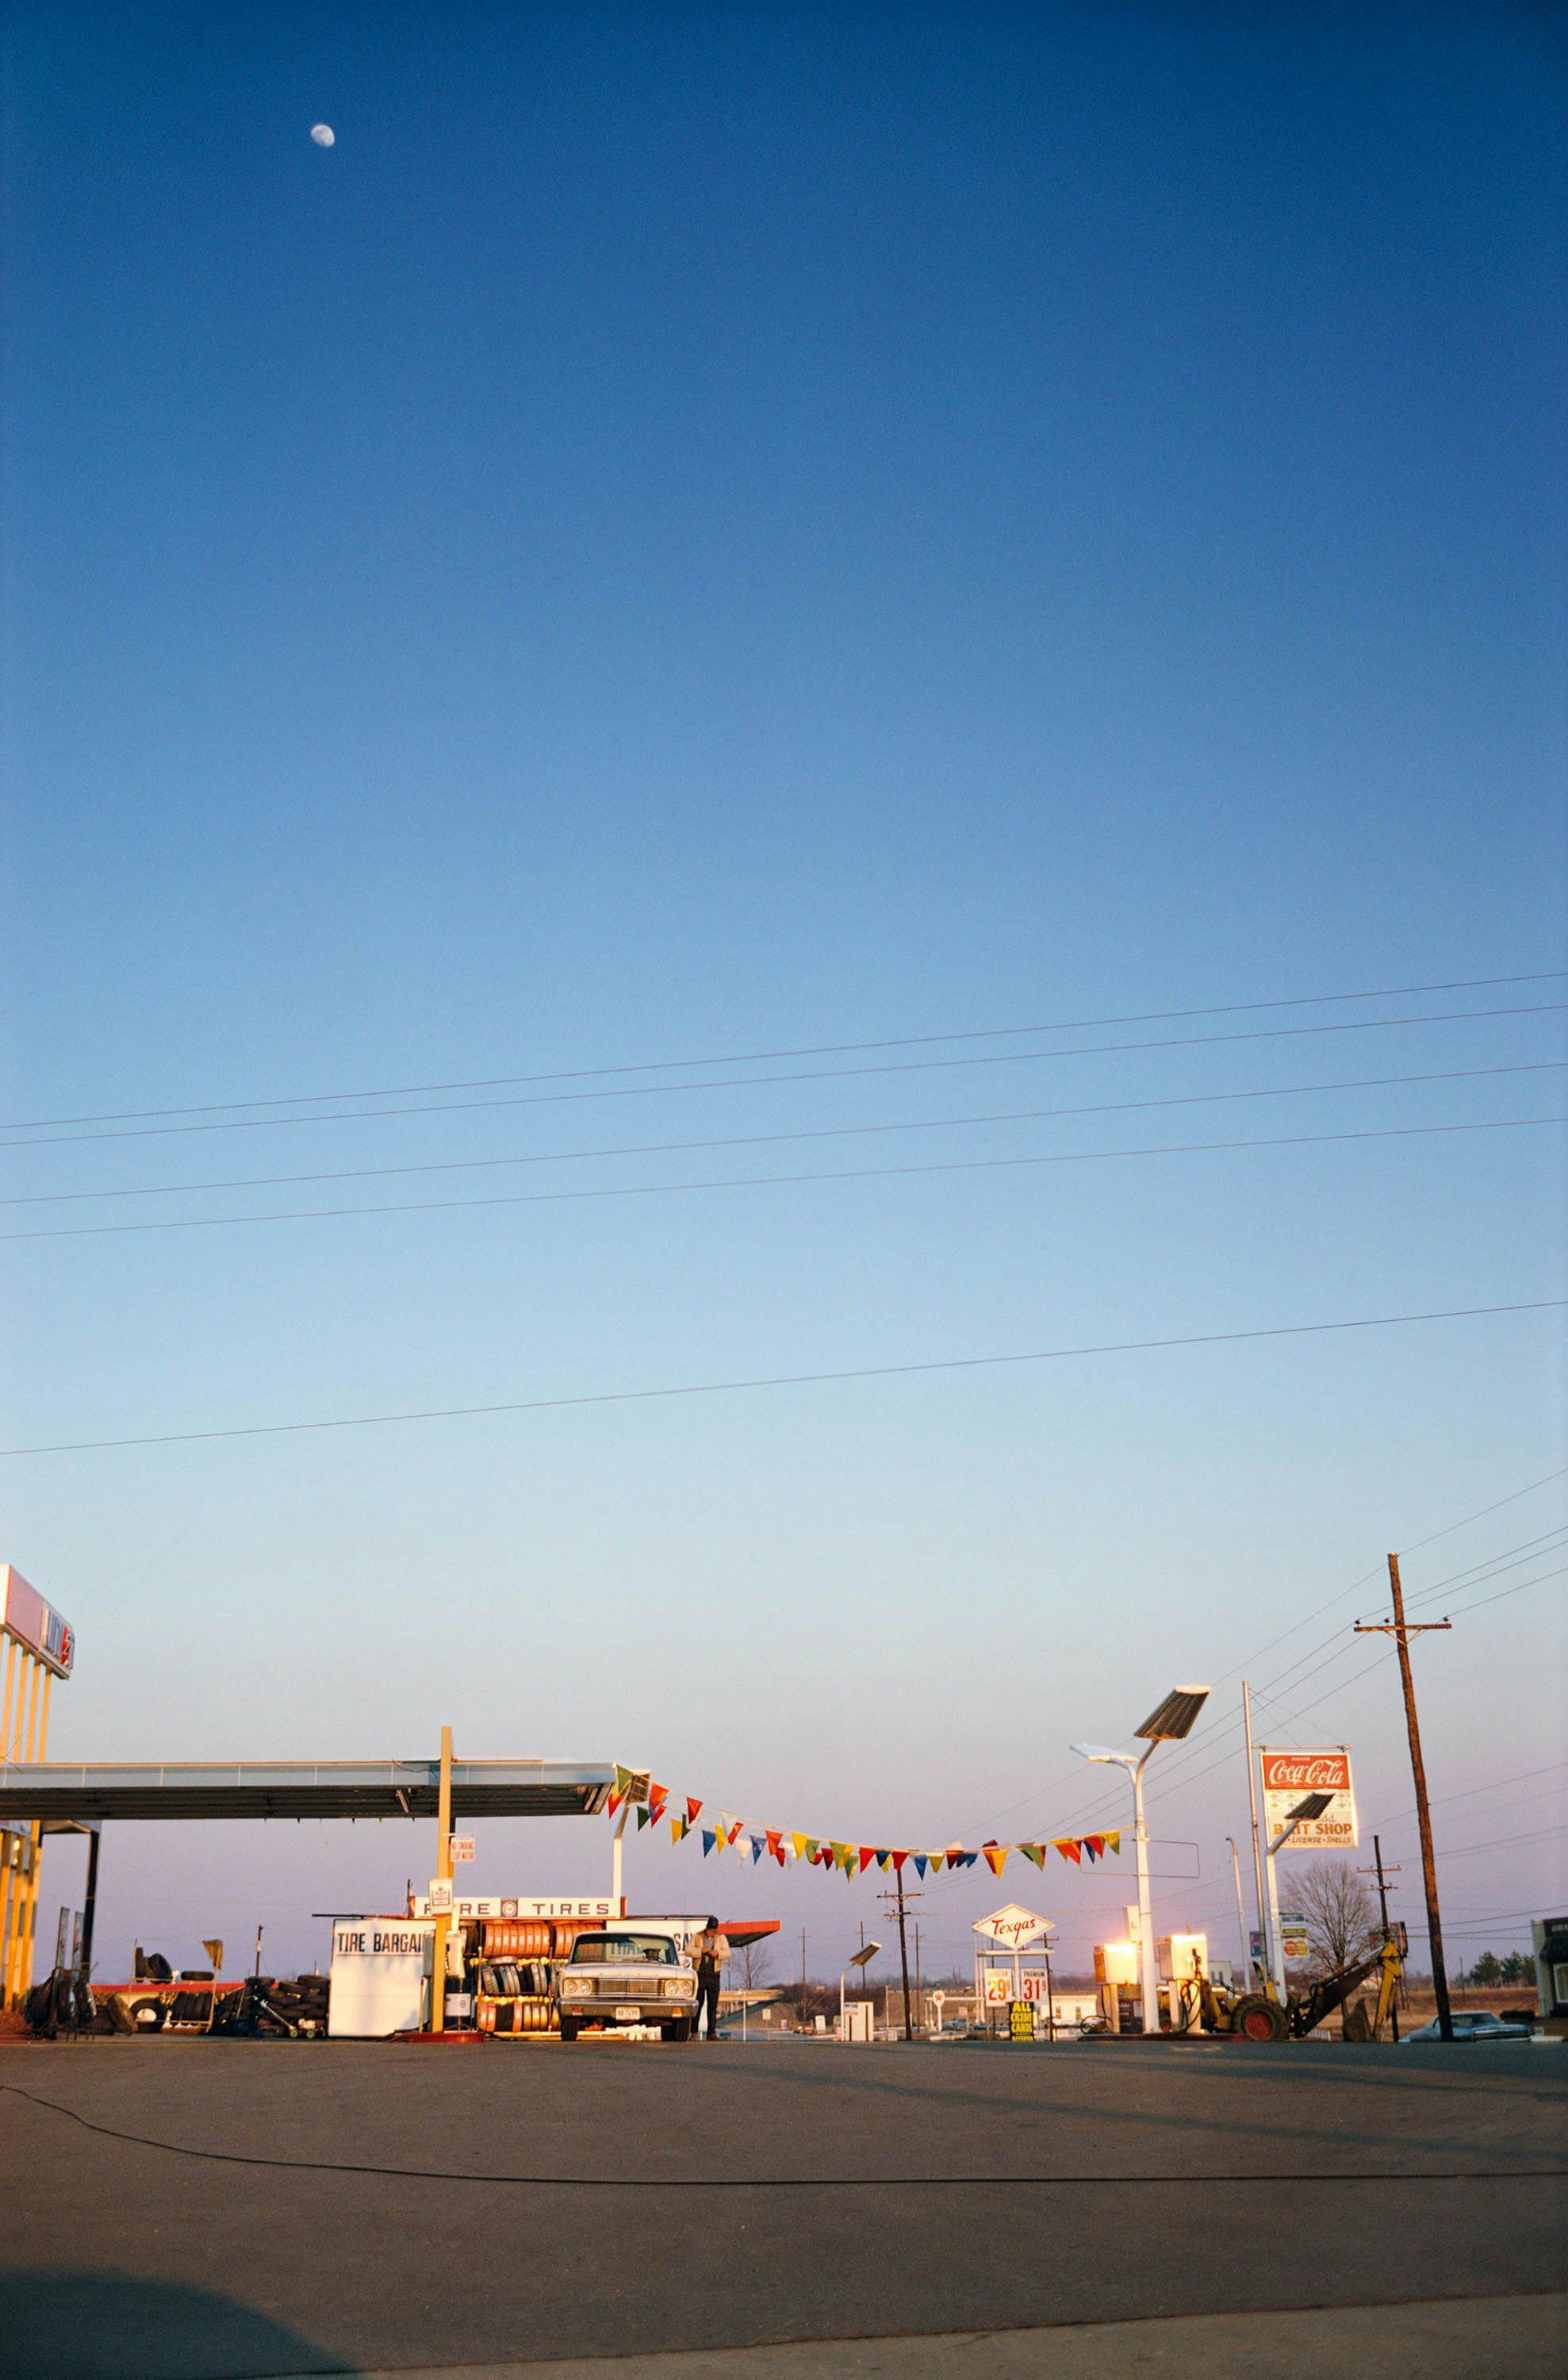 An untitled photograph by William Eggleston, circa 1970 to 1973.